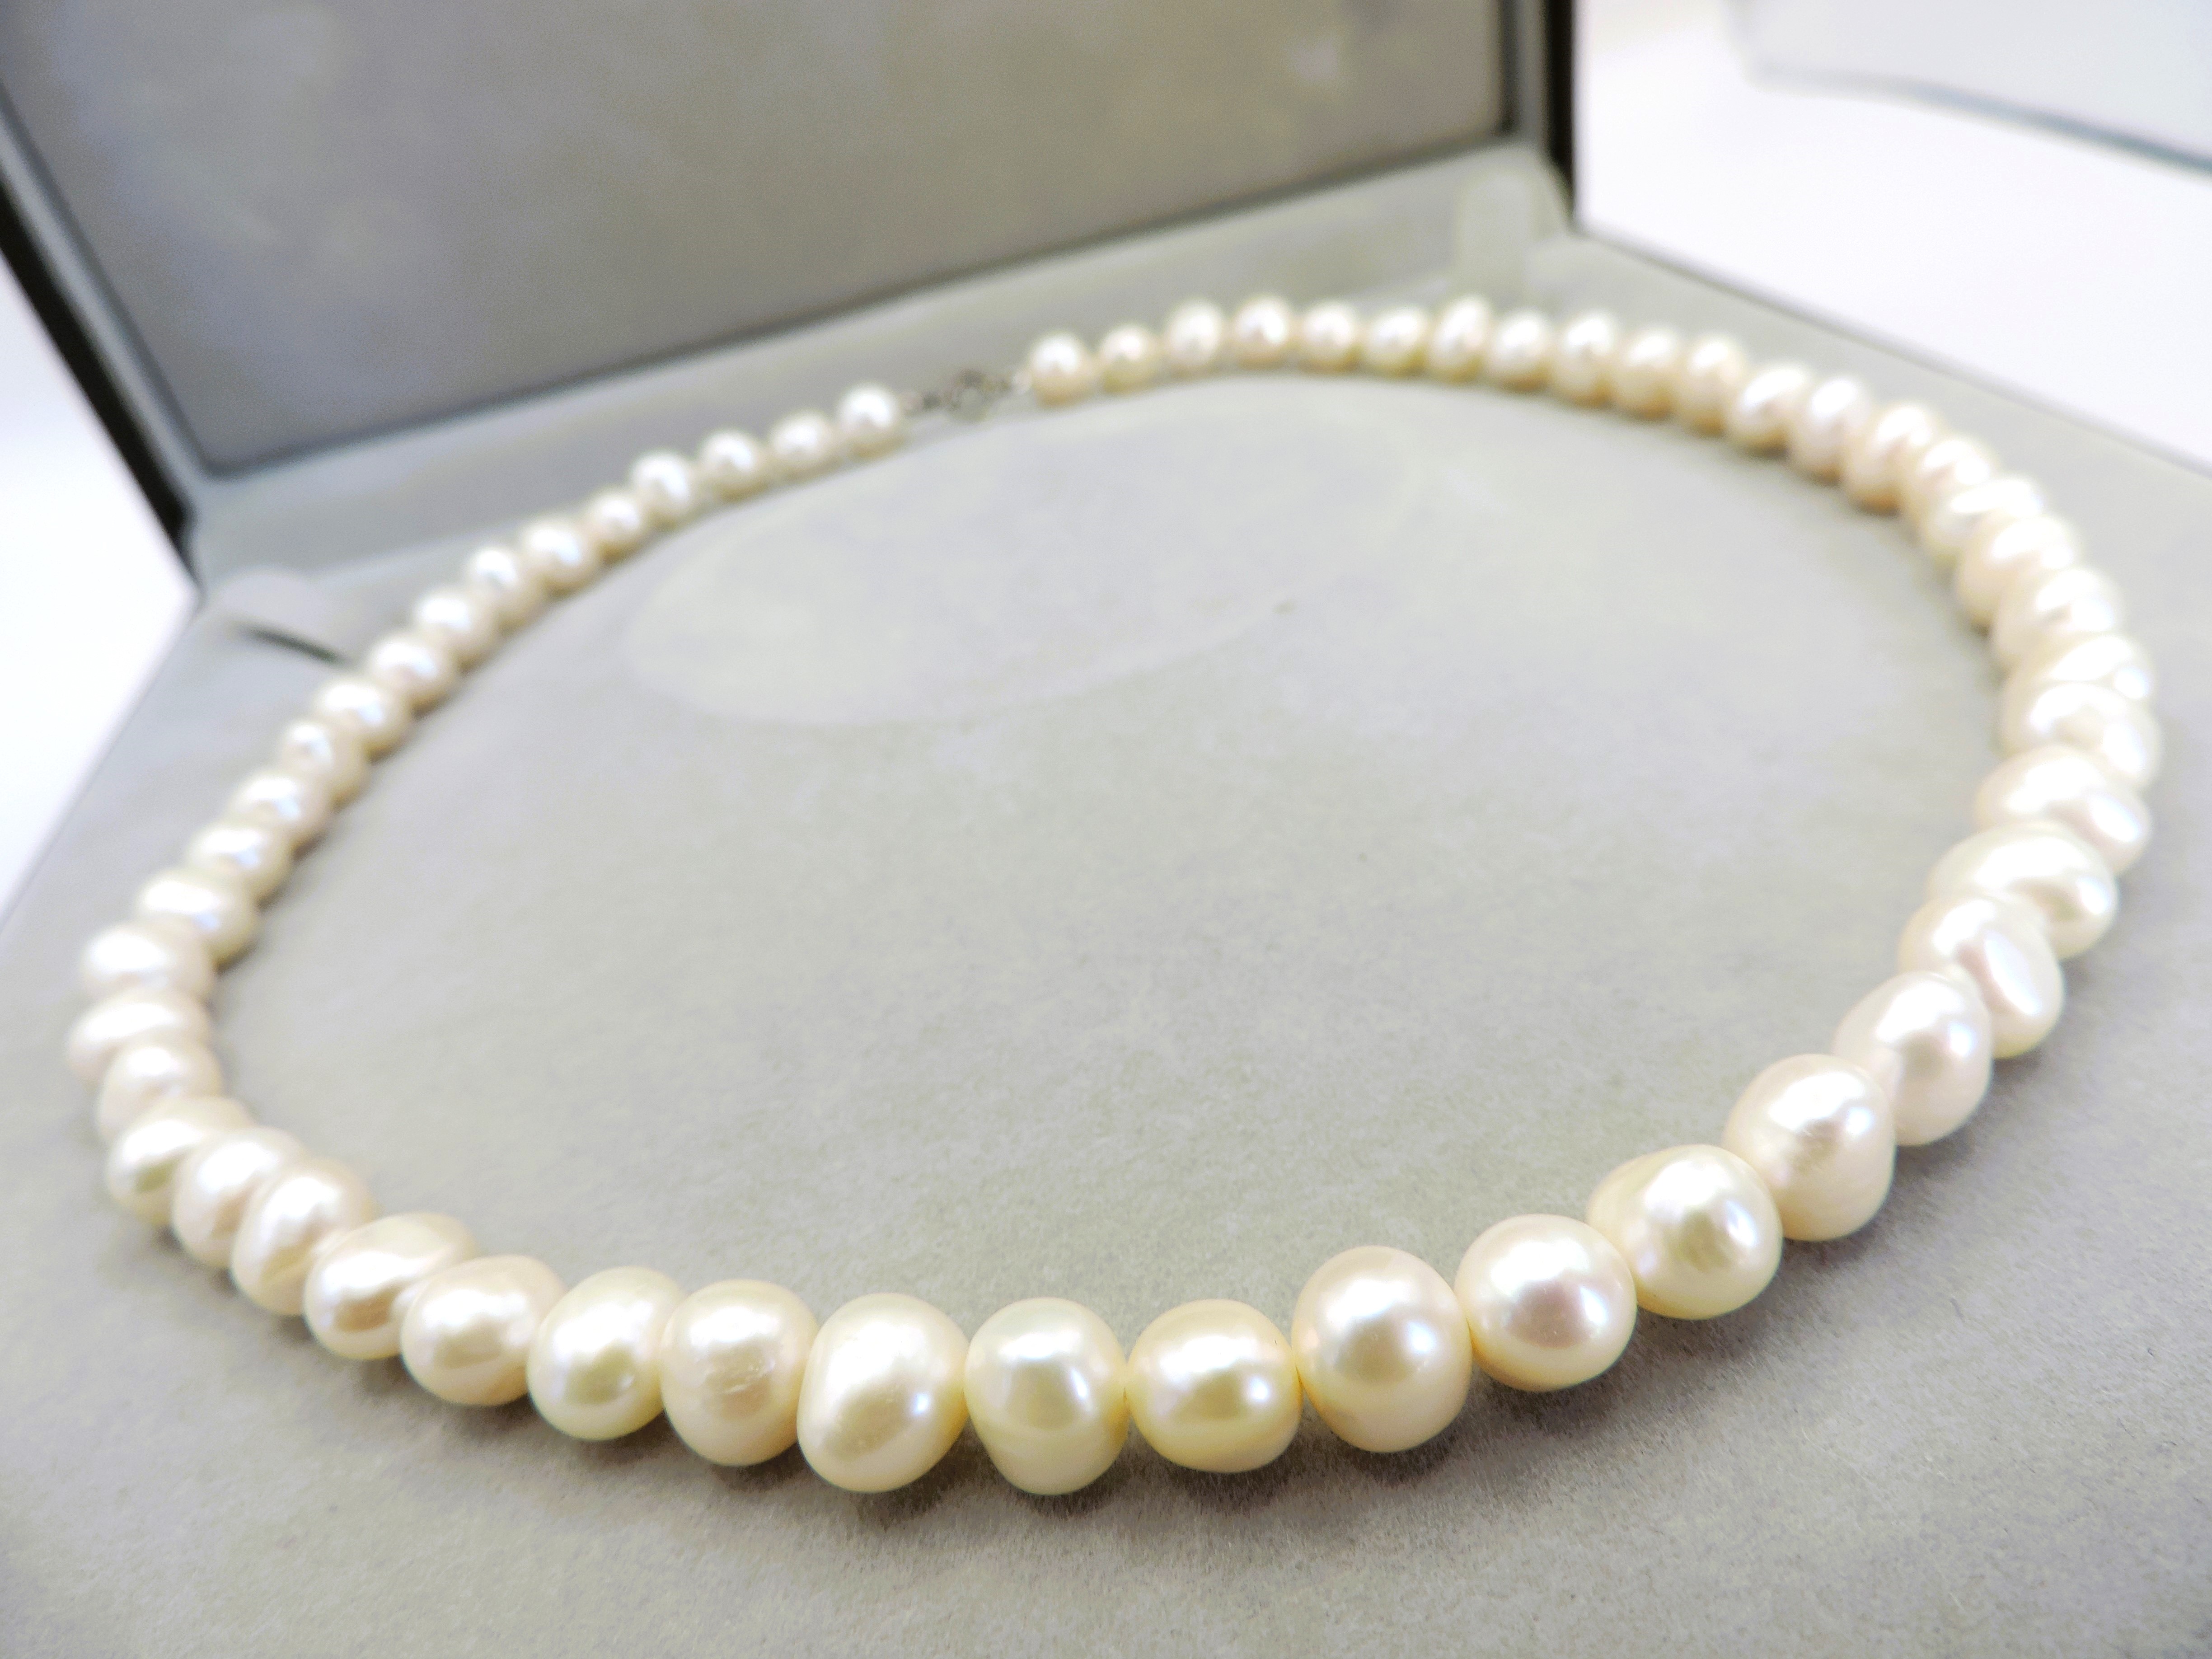 Cultured Pearl Necklace Silver Clasp New With Gift Box - Image 3 of 4